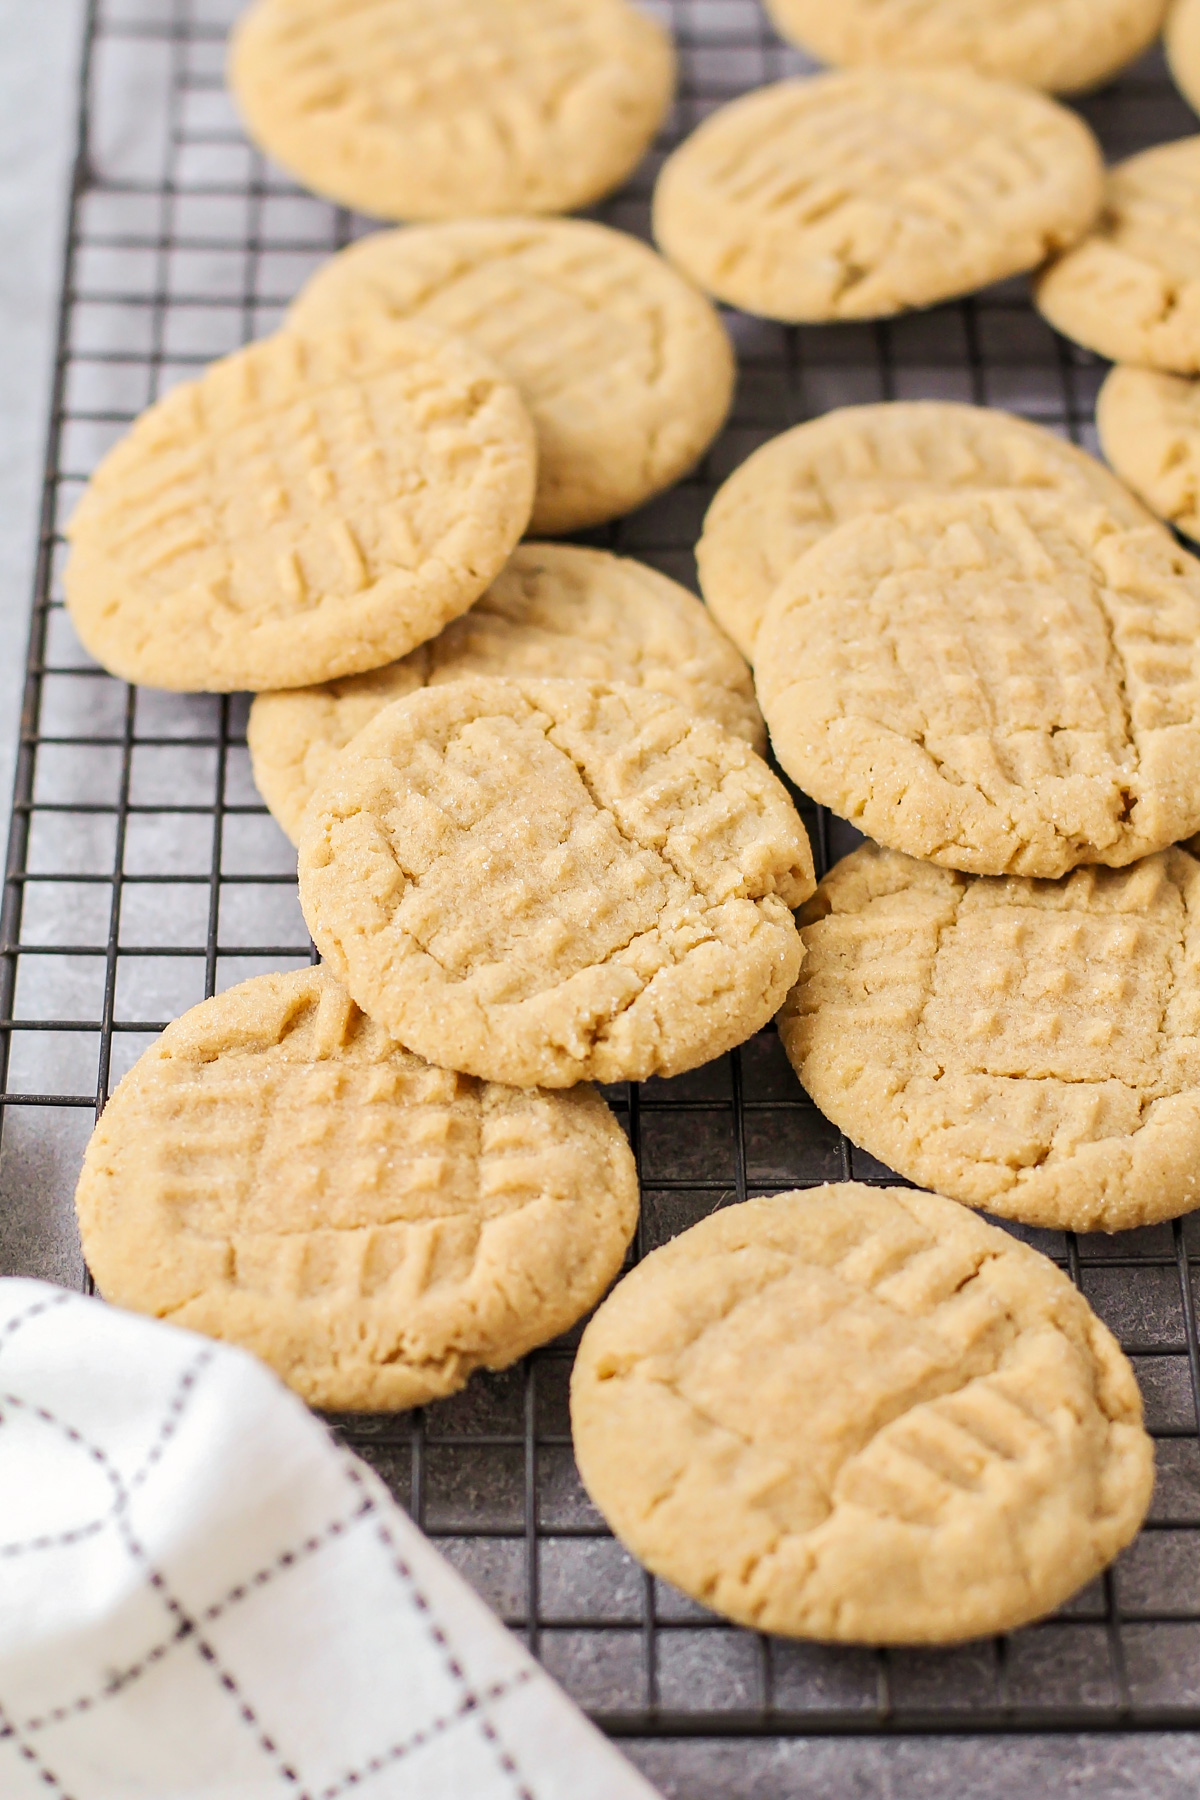 Peanut butter cookies cooling on a wire rack.